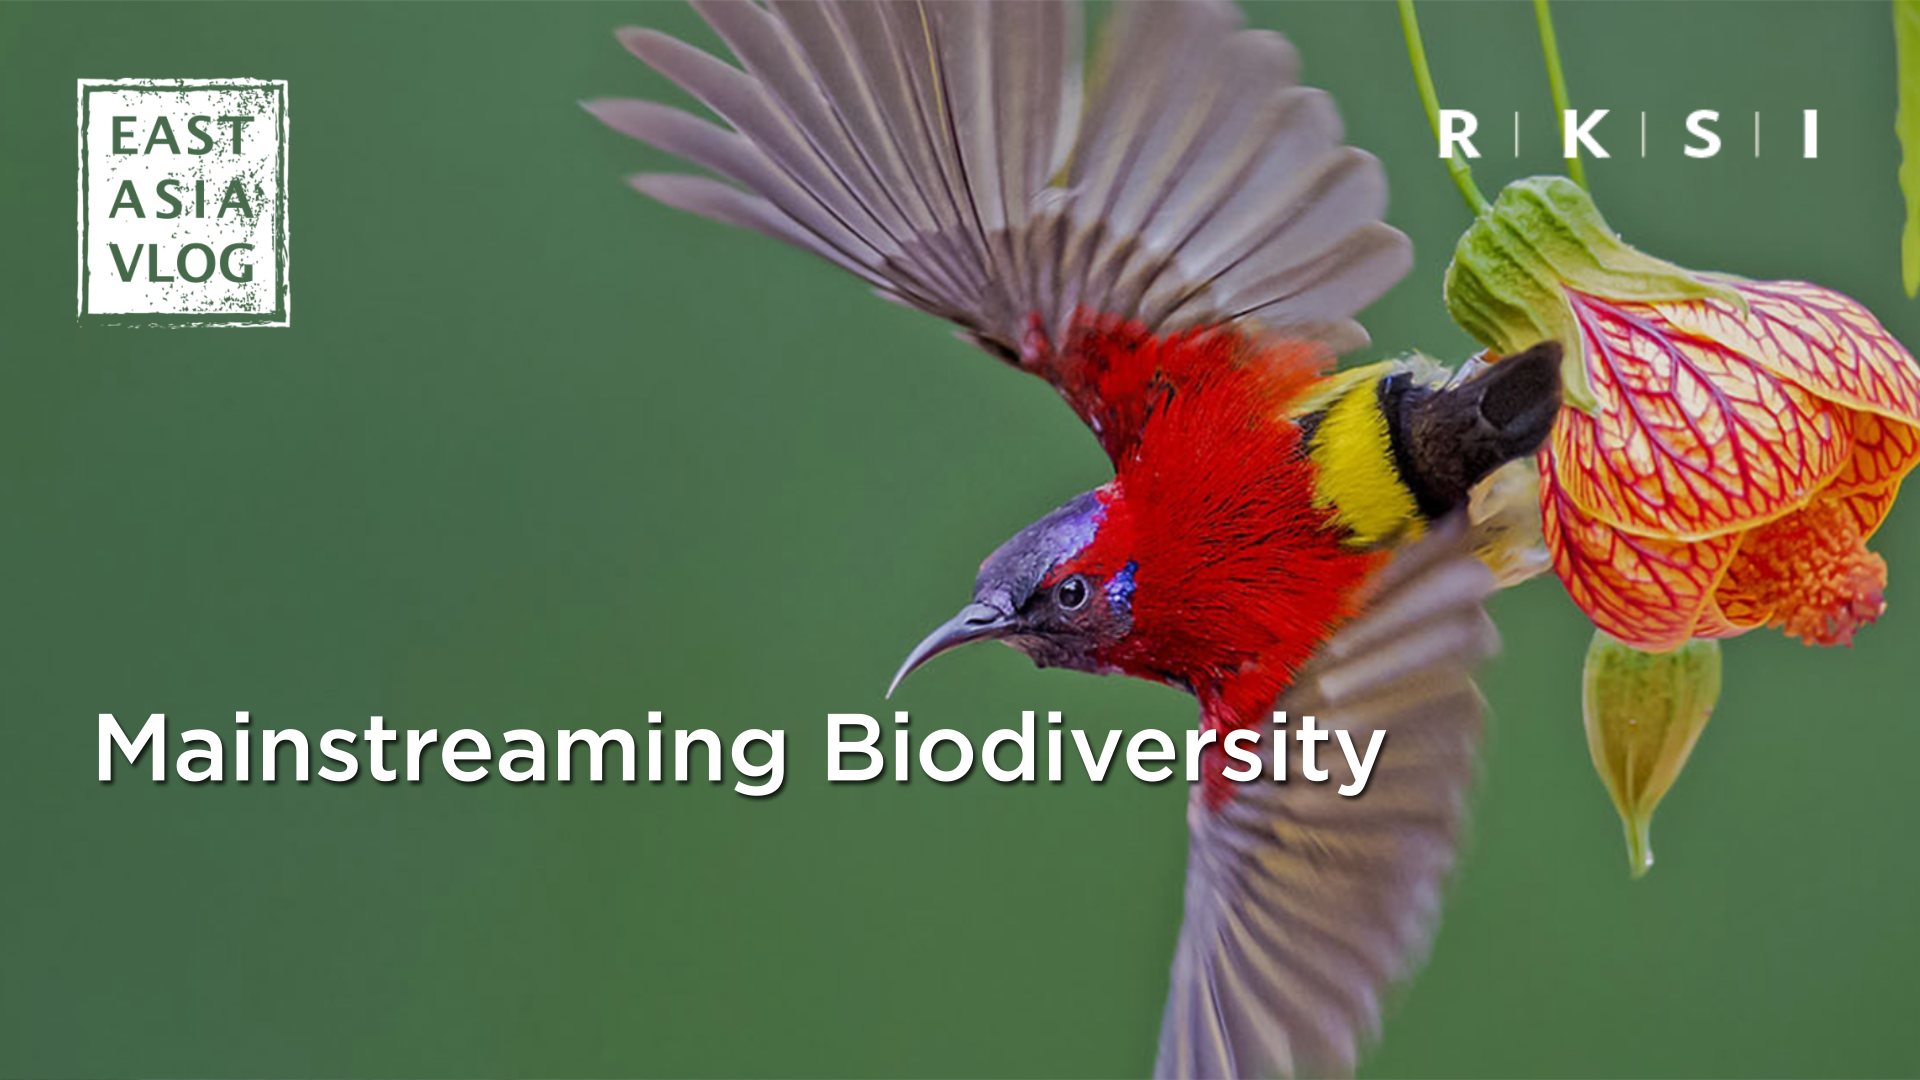 Mass Extinction of Species is Happening, Should We Care? Episode 3. Mainstreaming Biodiversity